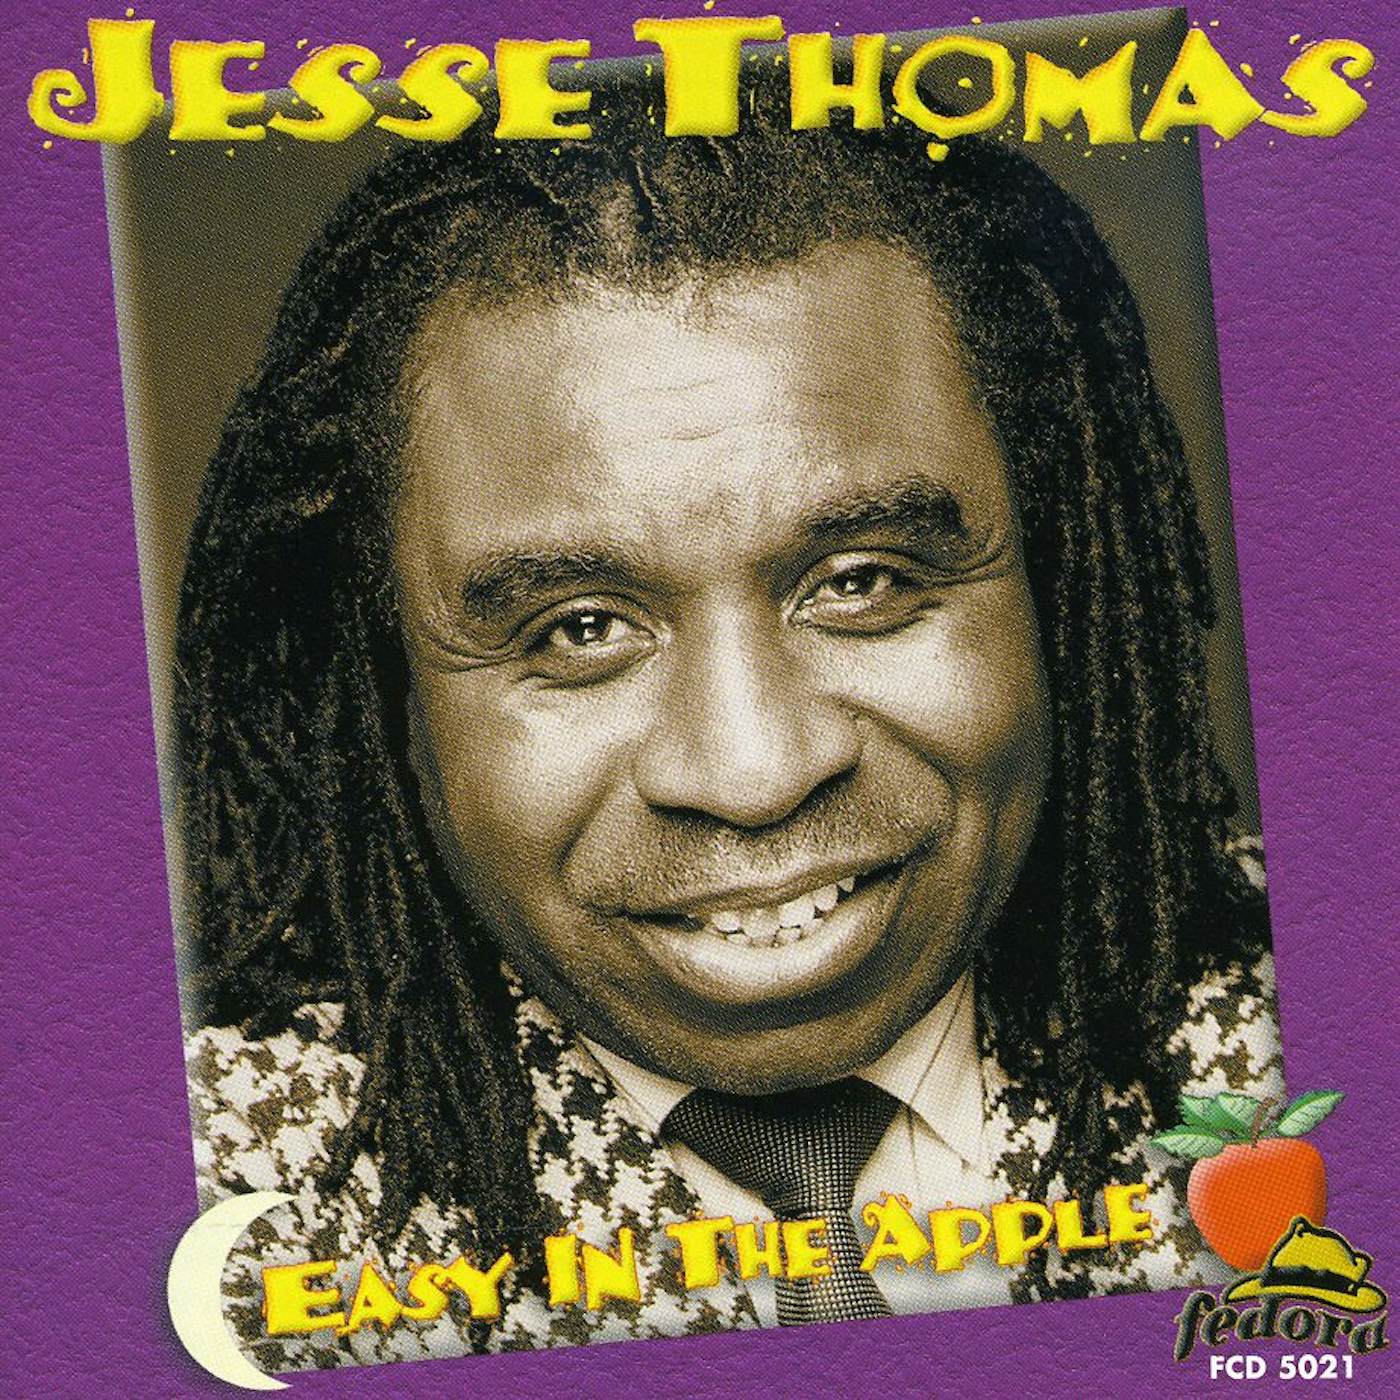 Jesse Thomas EASY IN THE APPLE CD